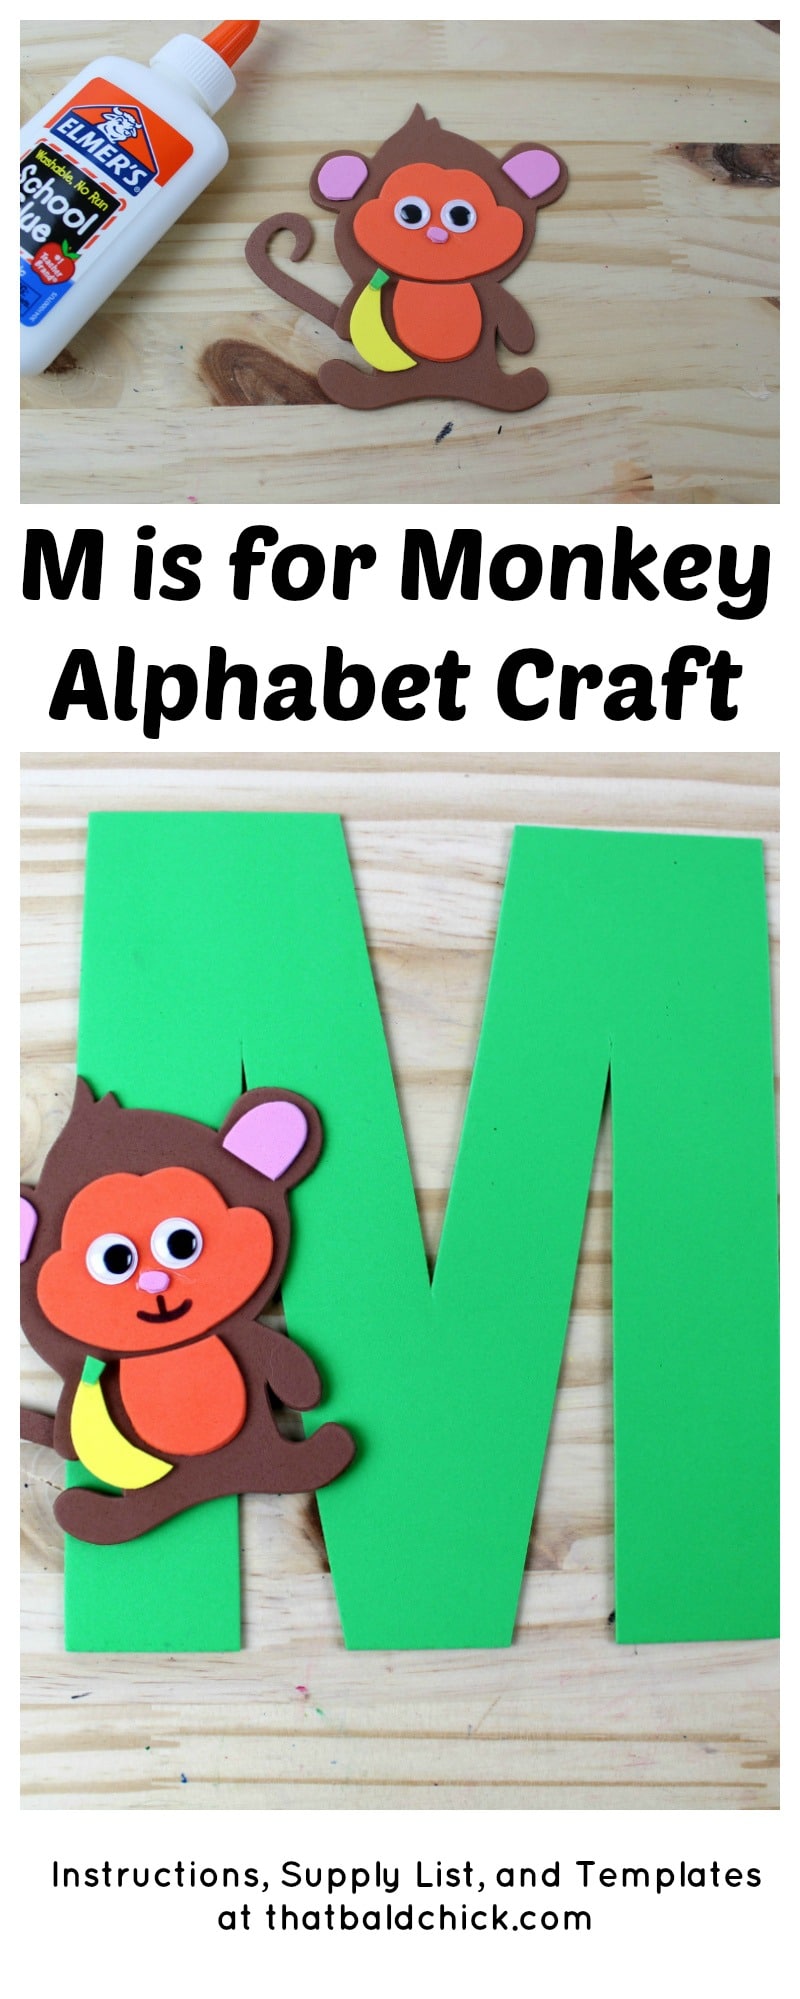 M is for Monkey Alphabet Craft - supply list, instructions, and templates at thatbaldchick.com